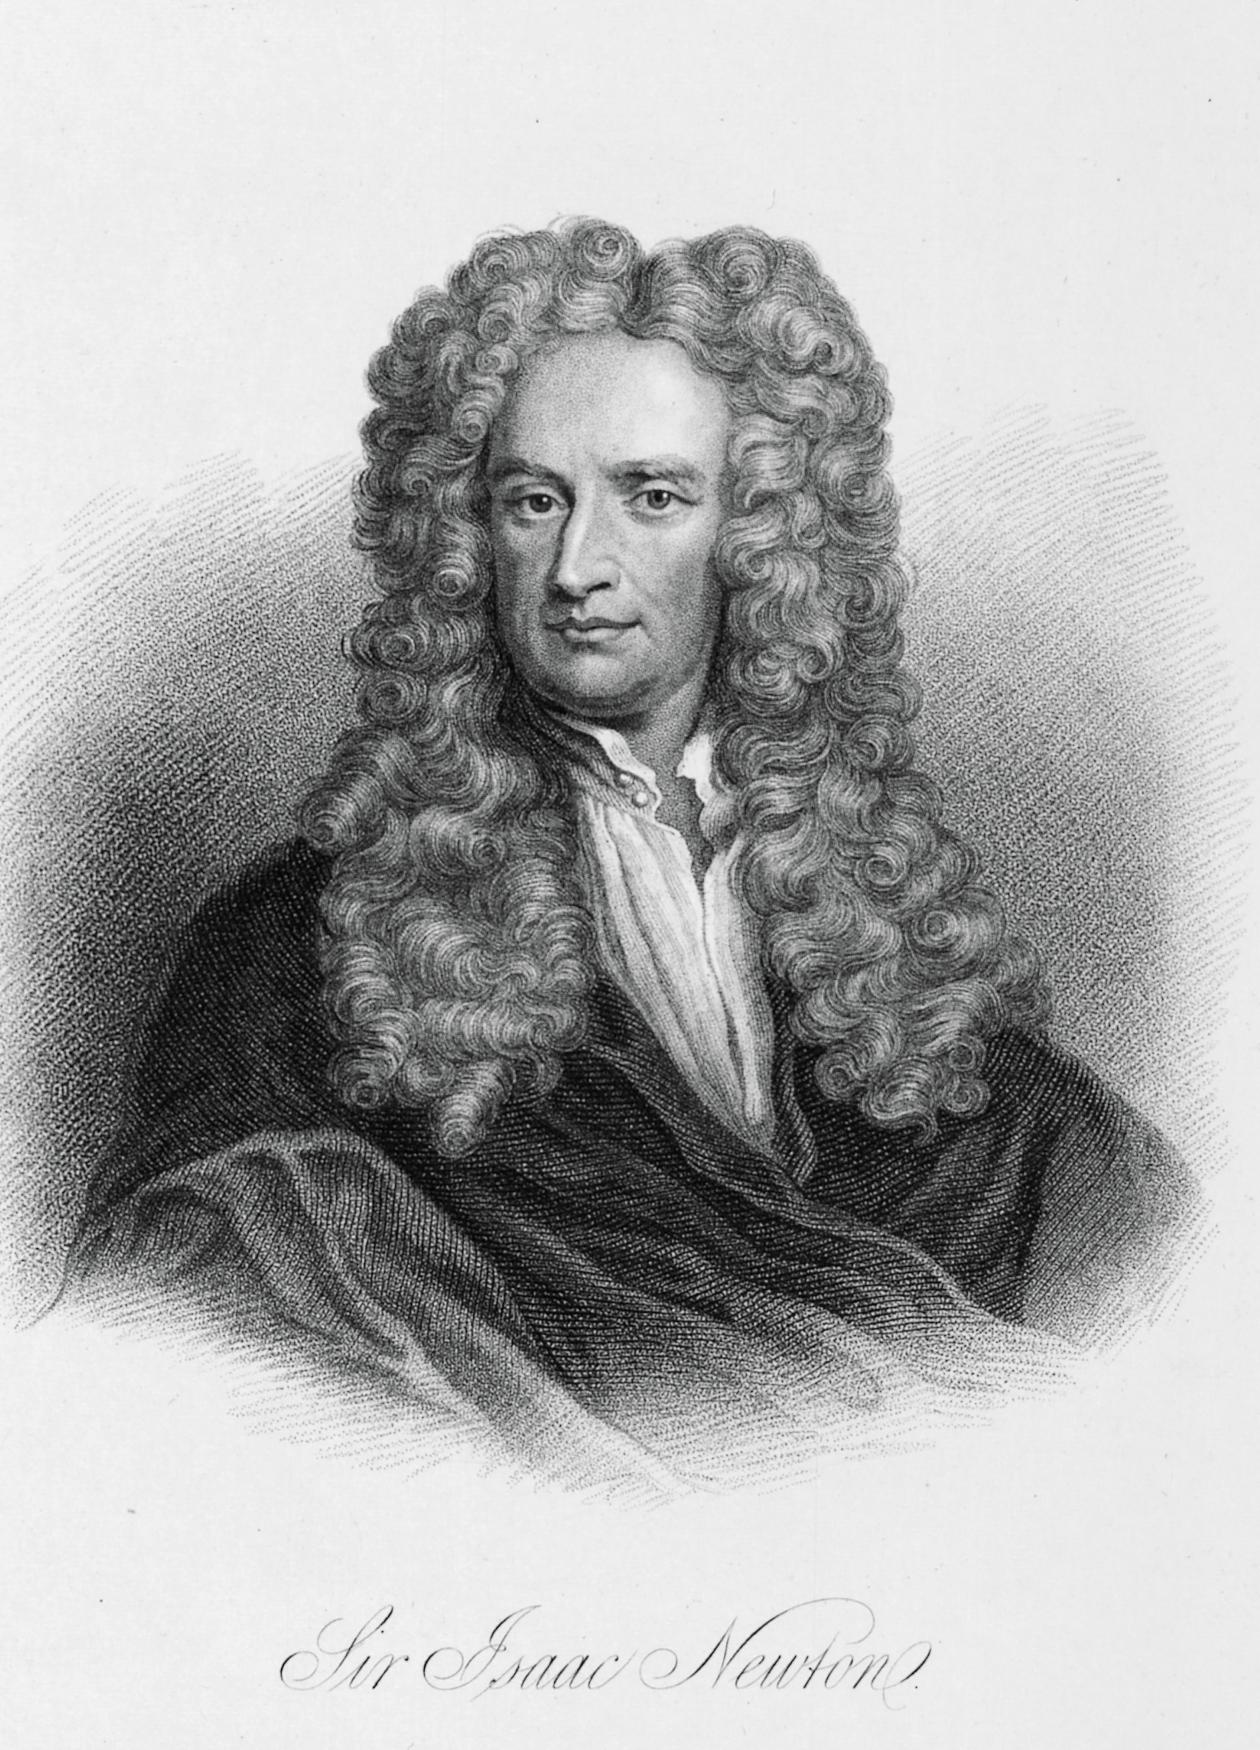 what did sir isaac newton contribute to science